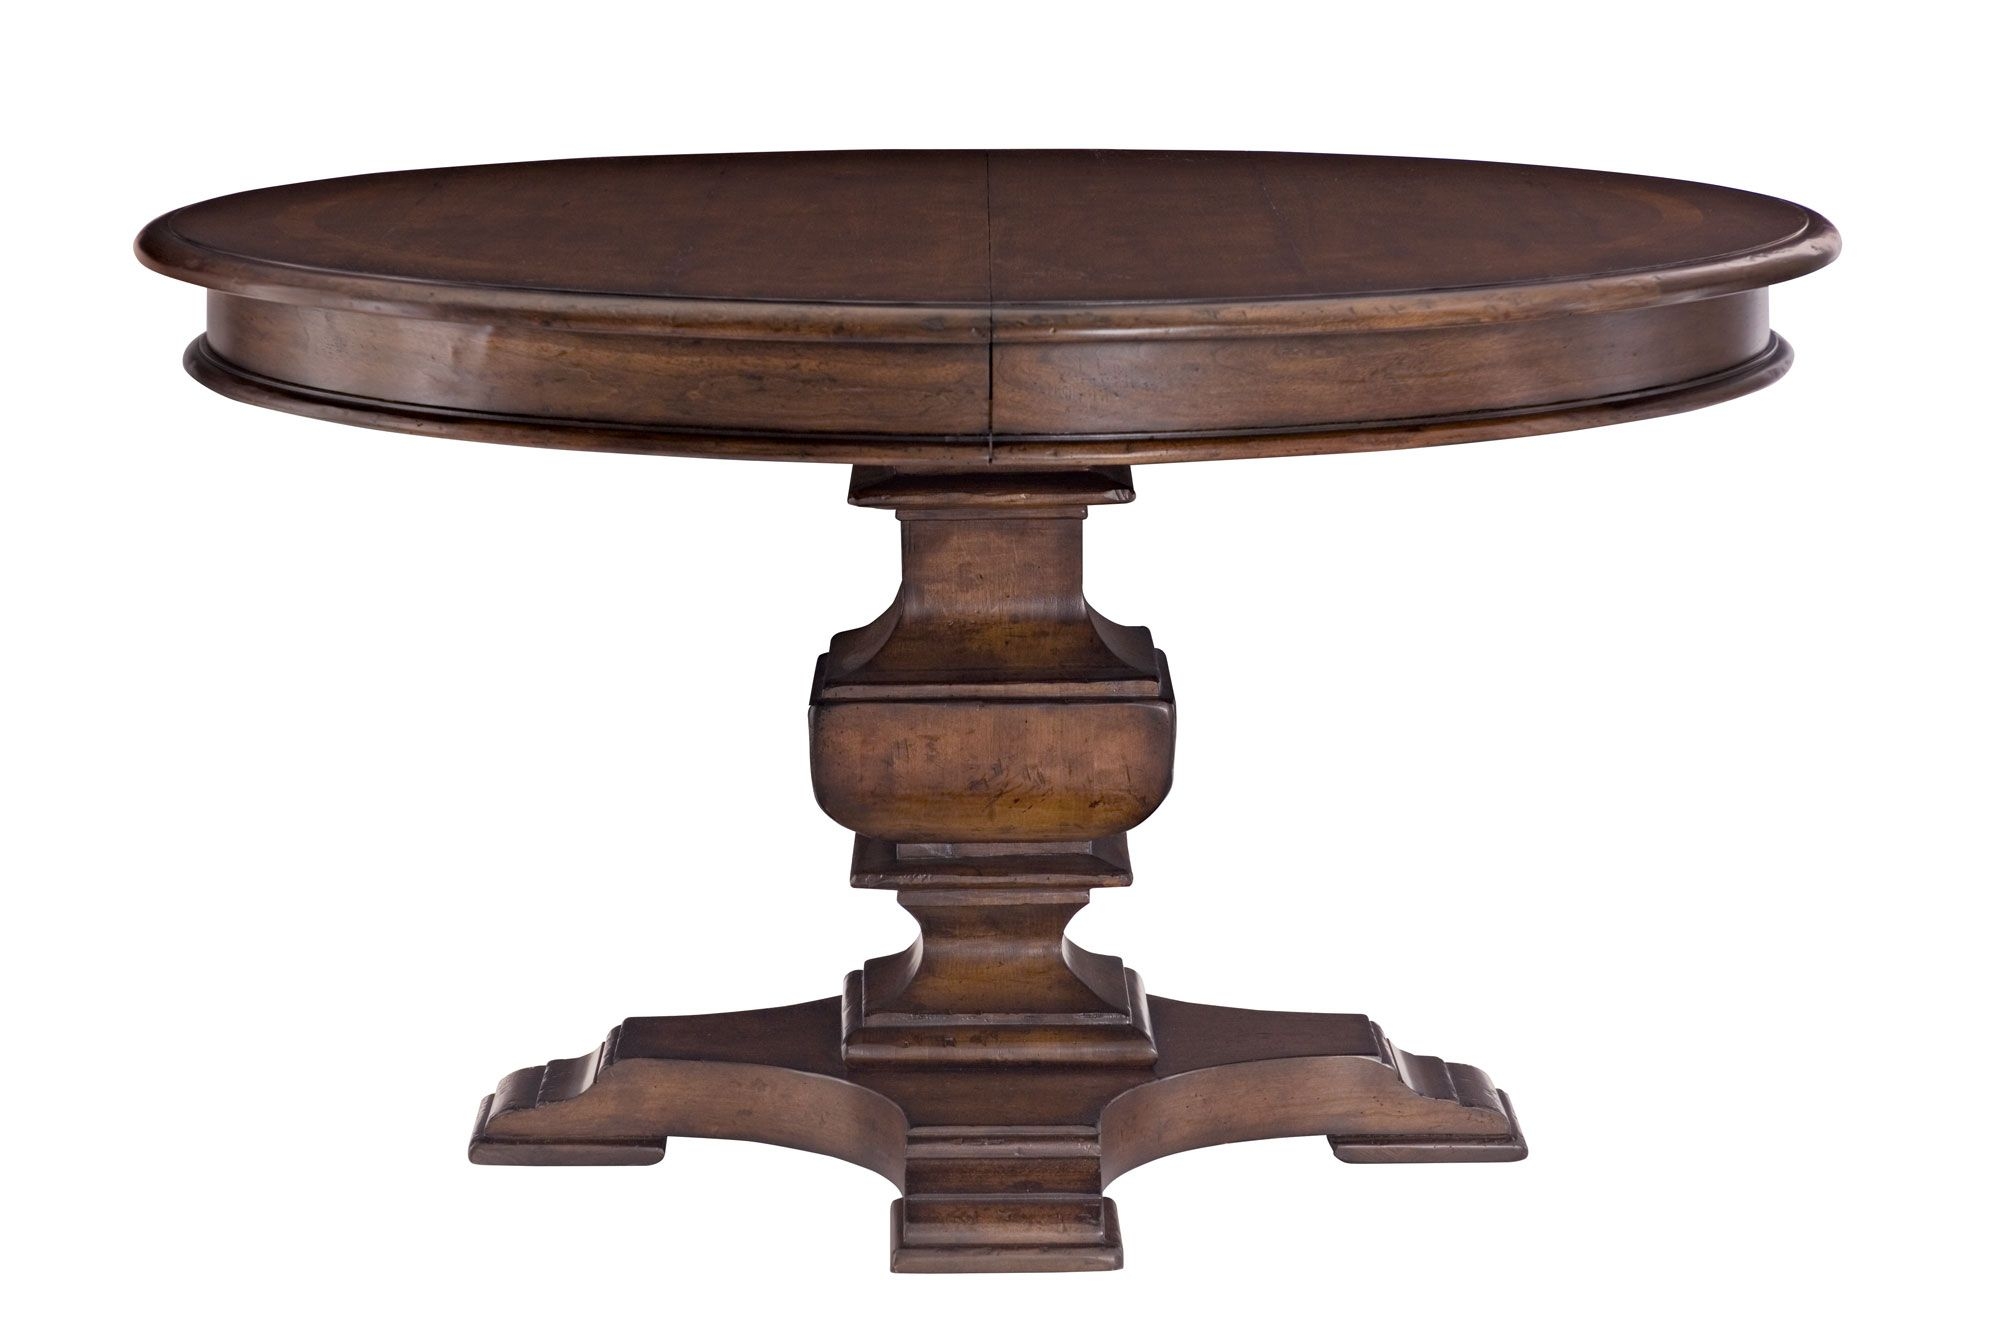 Round Dining Room Table With Pedestal Base